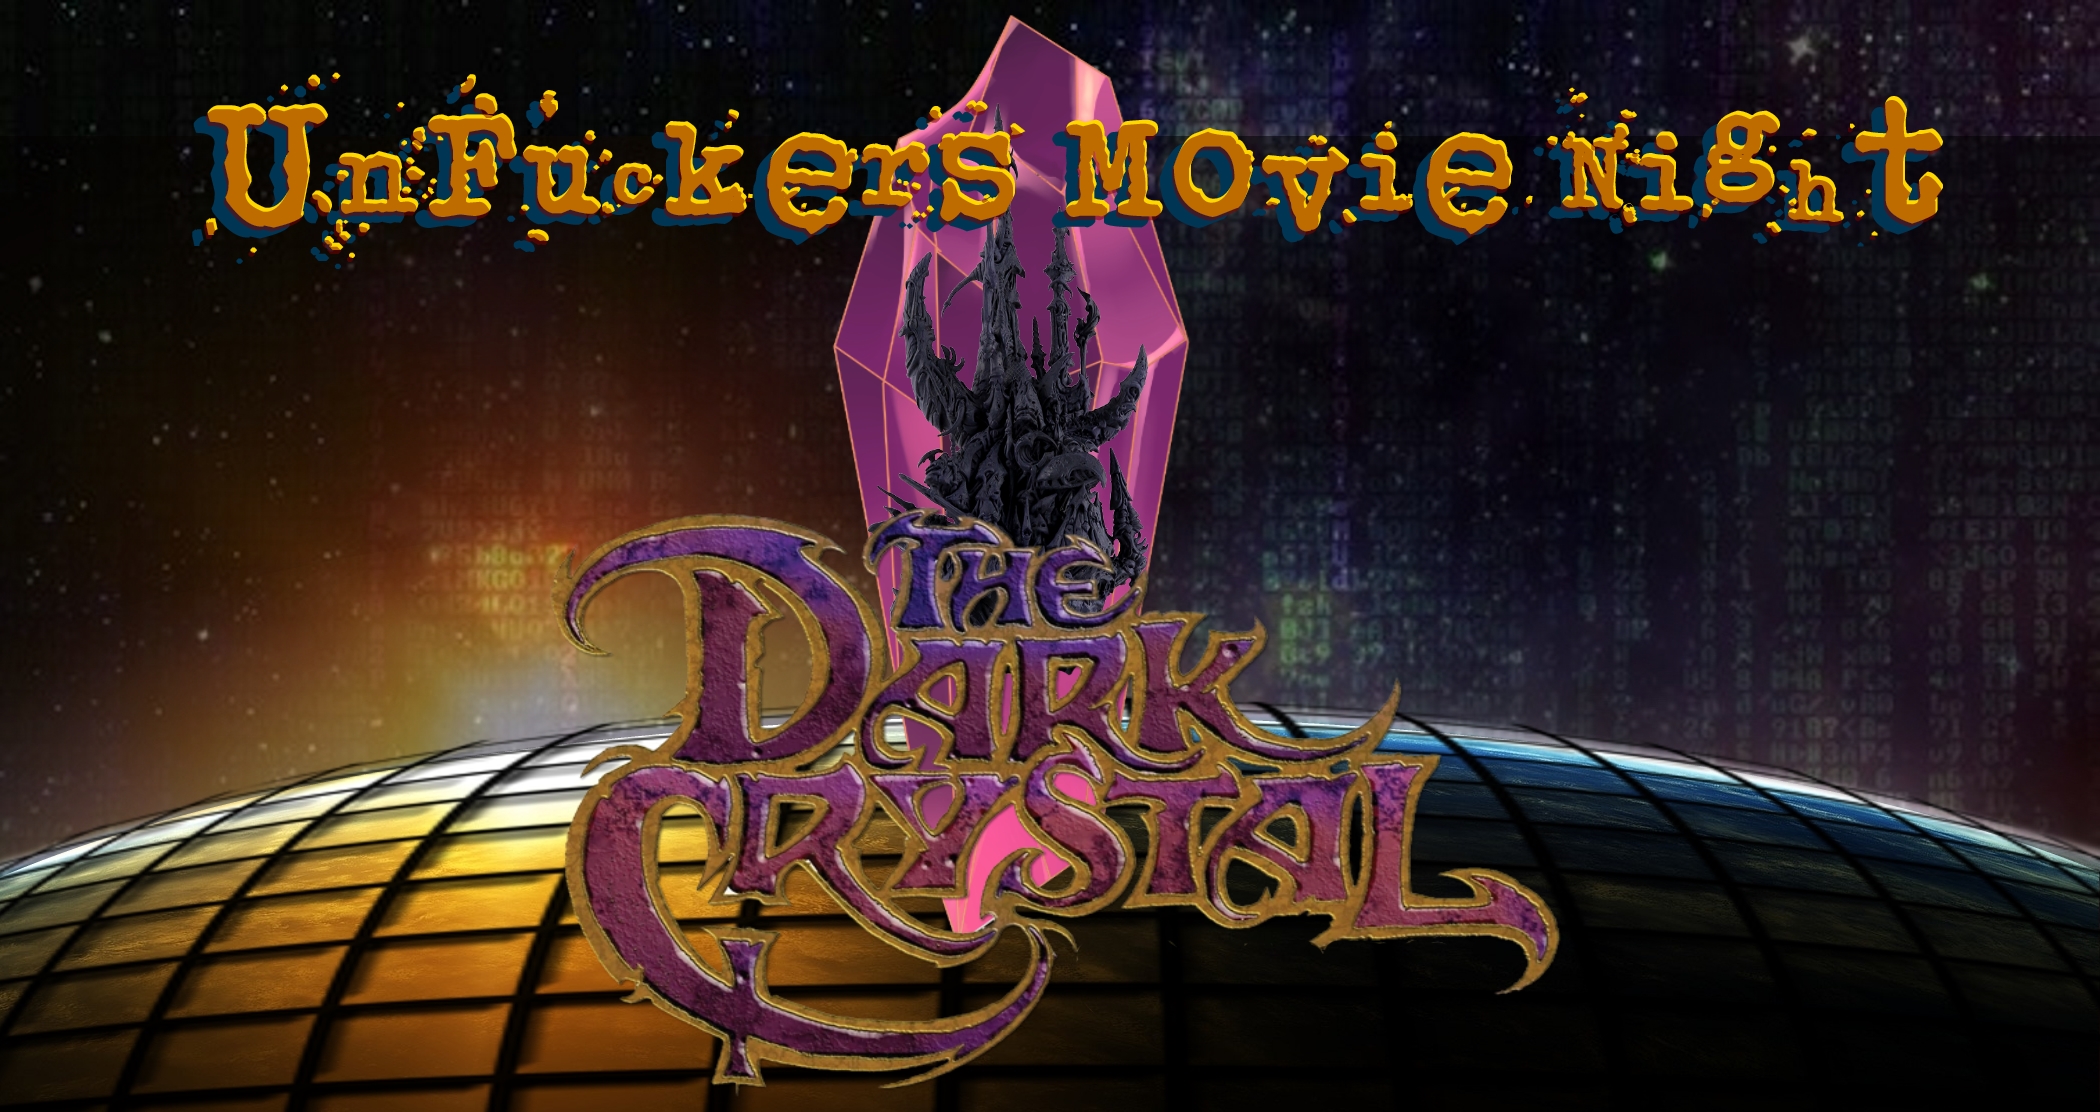 You are currently viewing UnFuckers Movie: The Dark Crystal, 1982